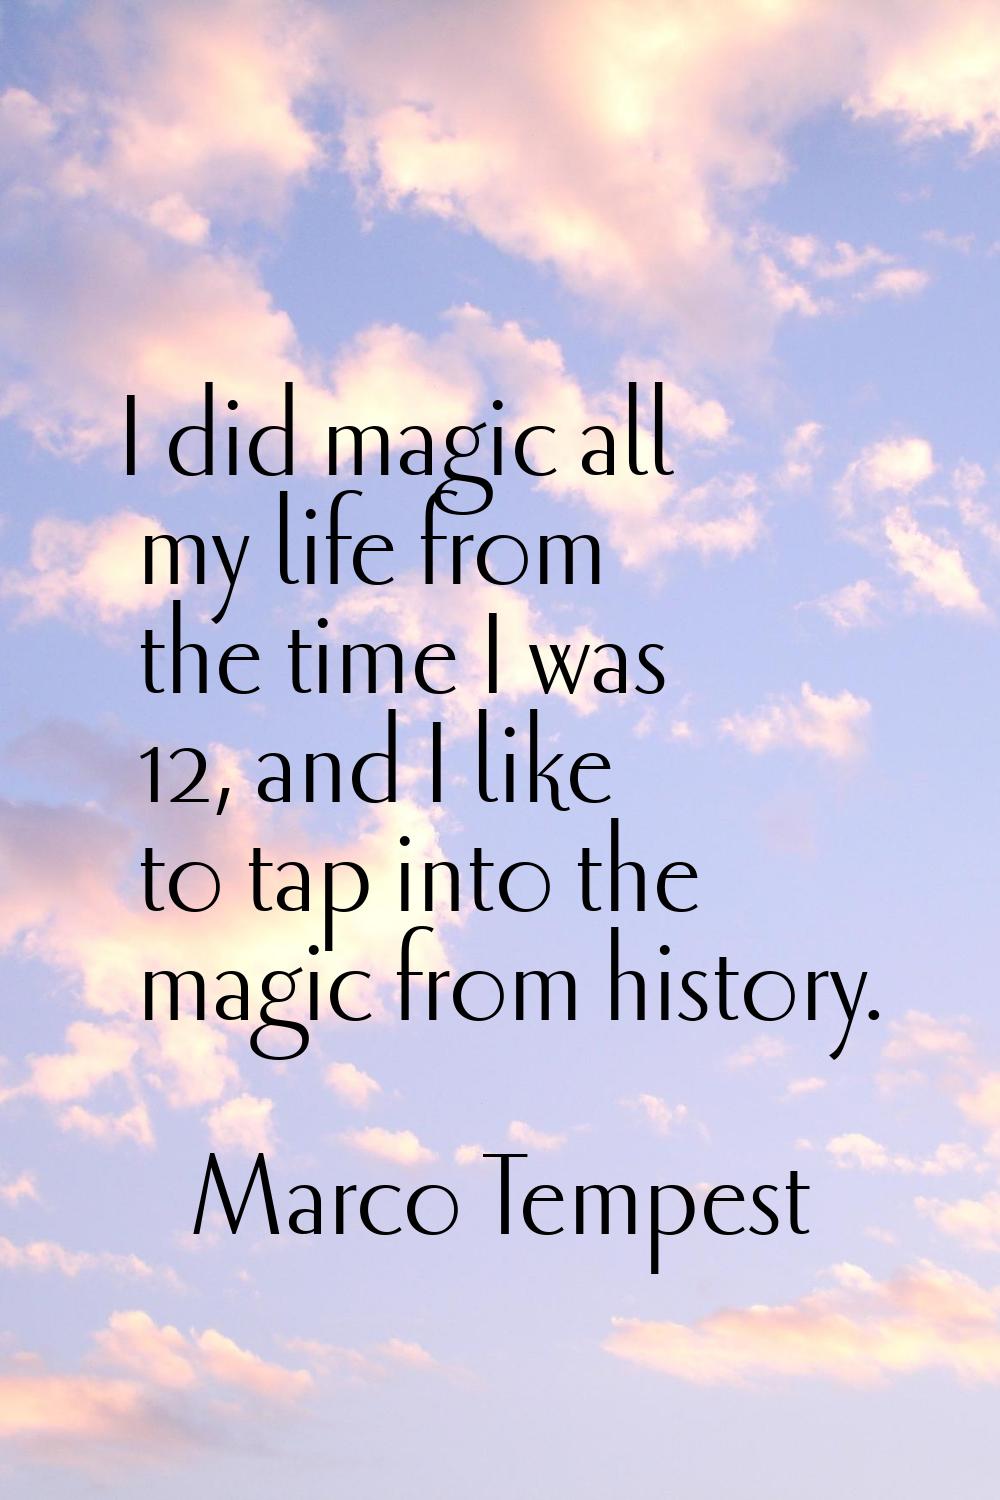 I did magic all my life from the time I was 12, and I like to tap into the magic from history.